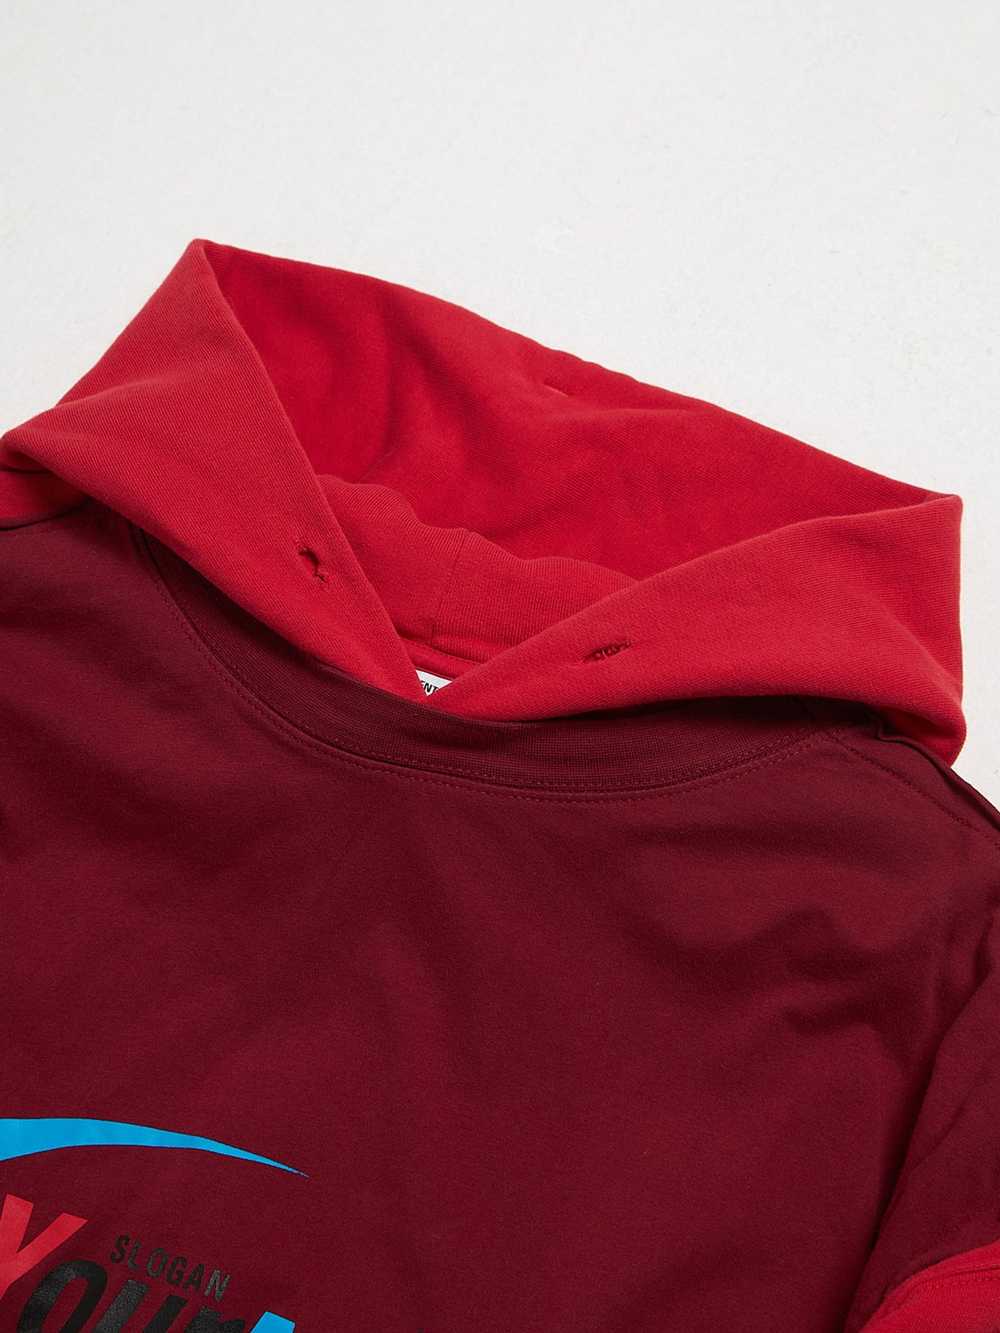 Vetements Burgundy and Red Patched Your Name Prin… - image 3